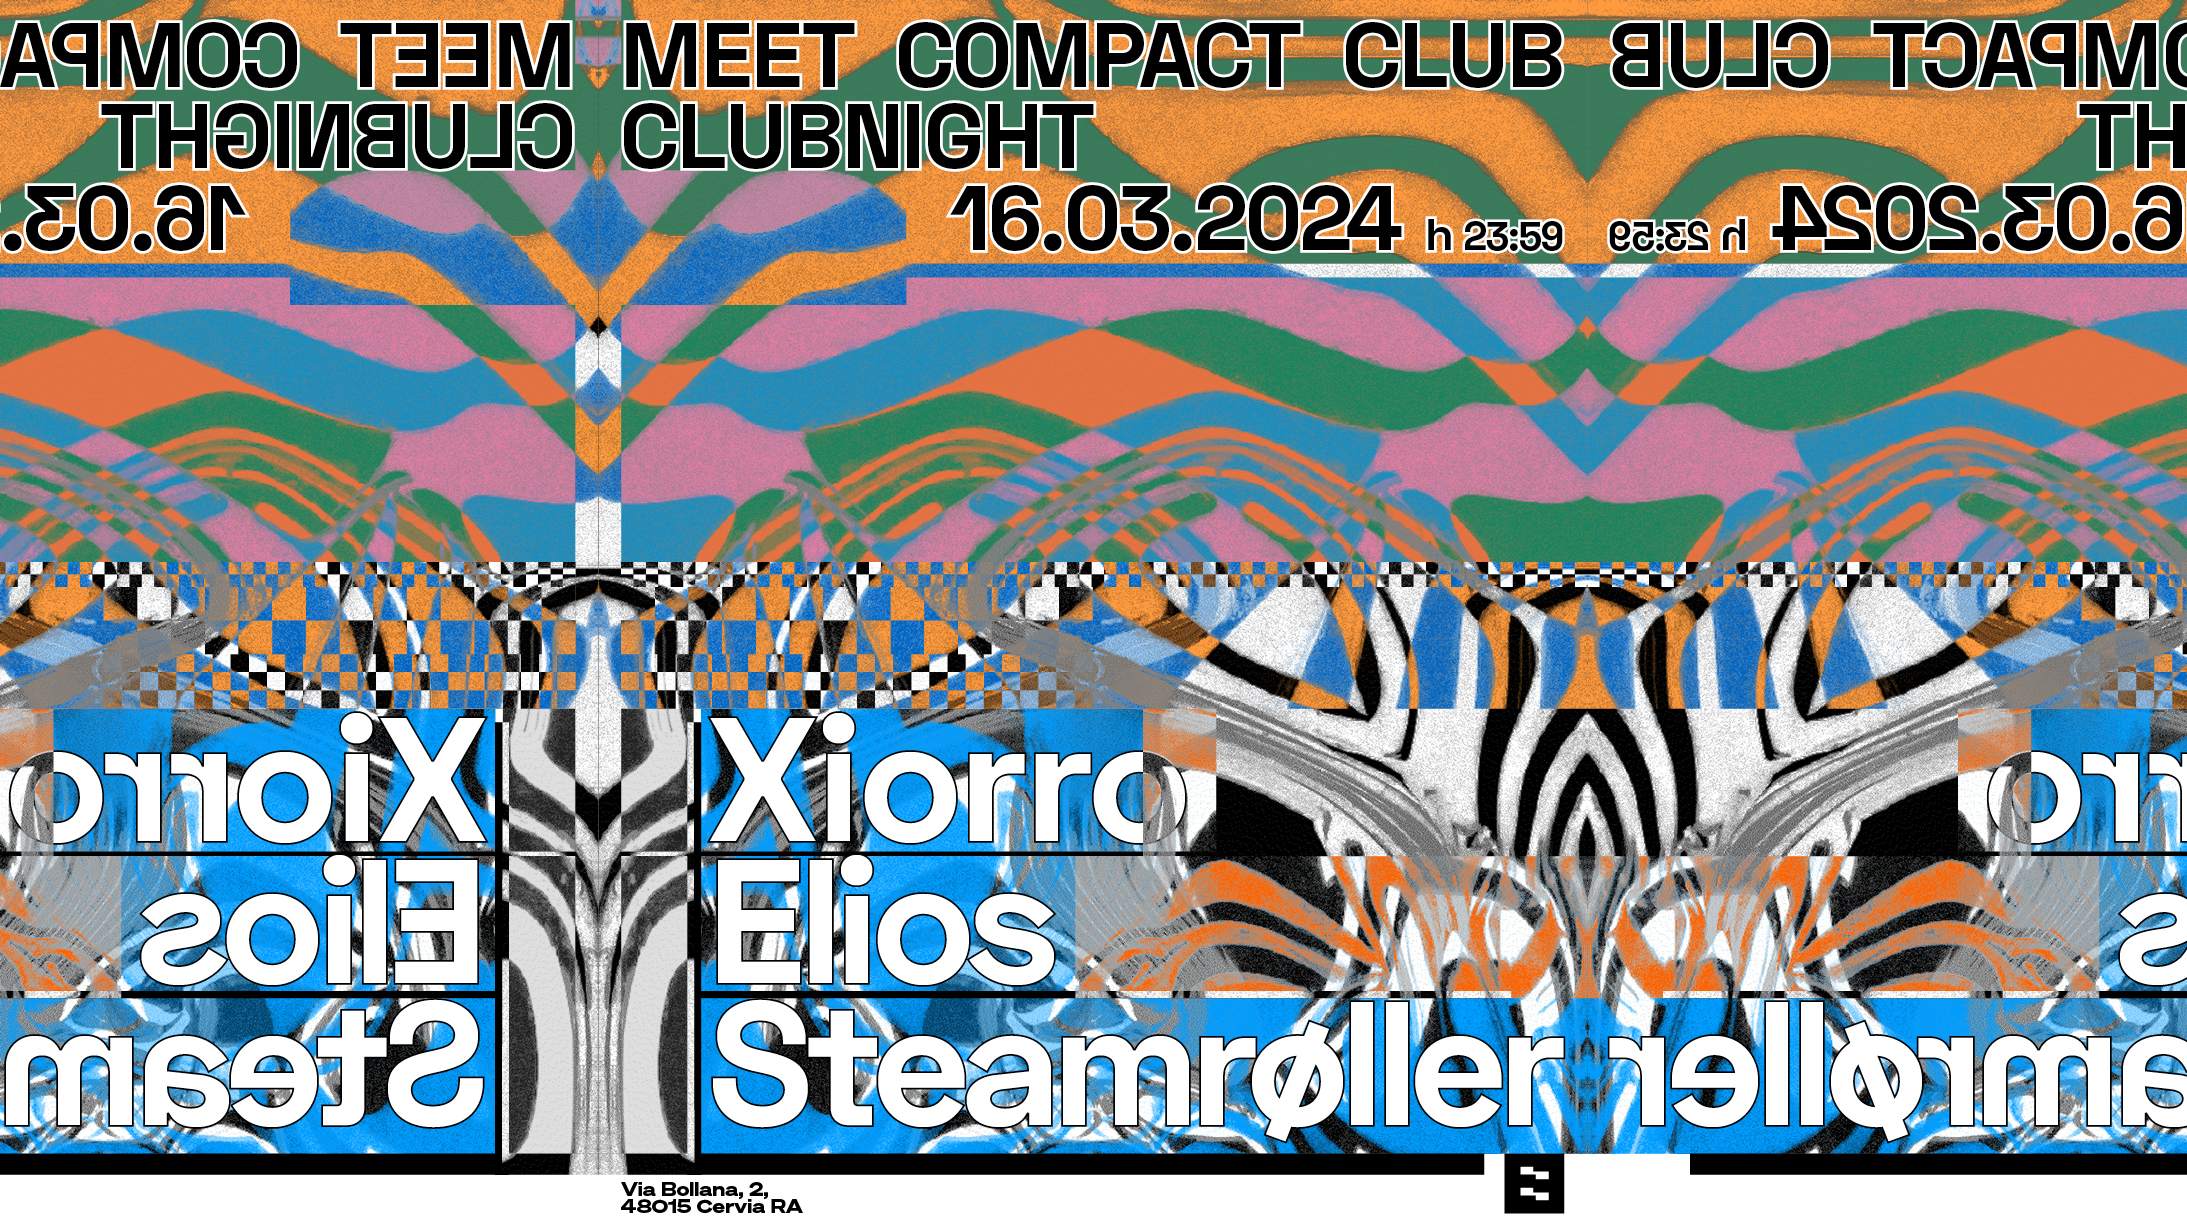 Meet Compact Club with Xiorro - フライヤー表